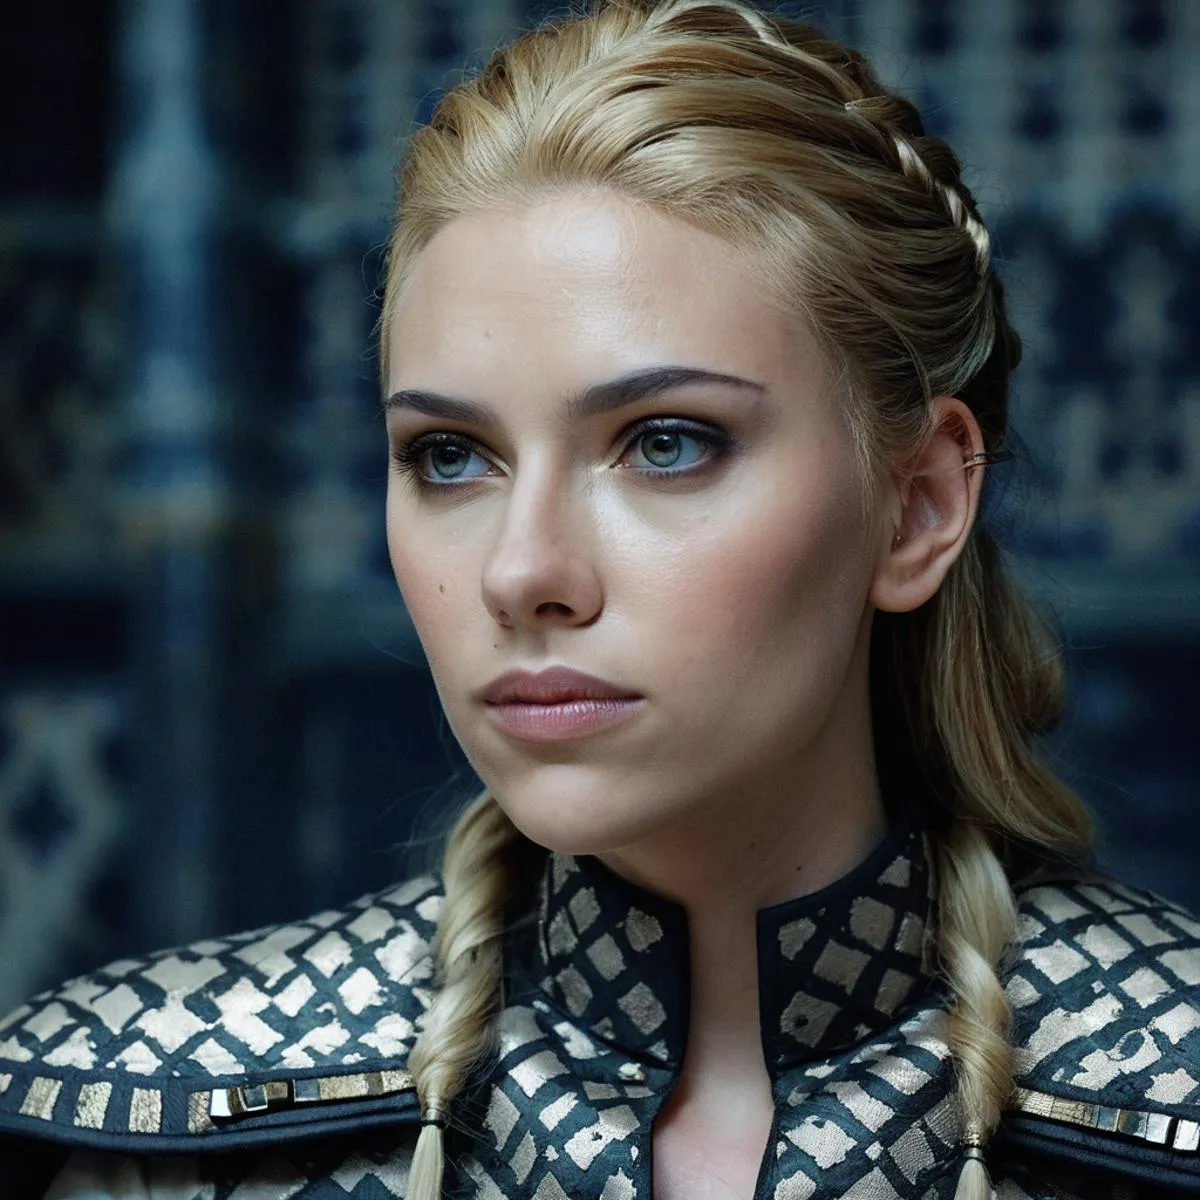 Fantasy portrait of a blond woman warrior with braids, wearing intricate armor, AI generated using Stable Diffusion.